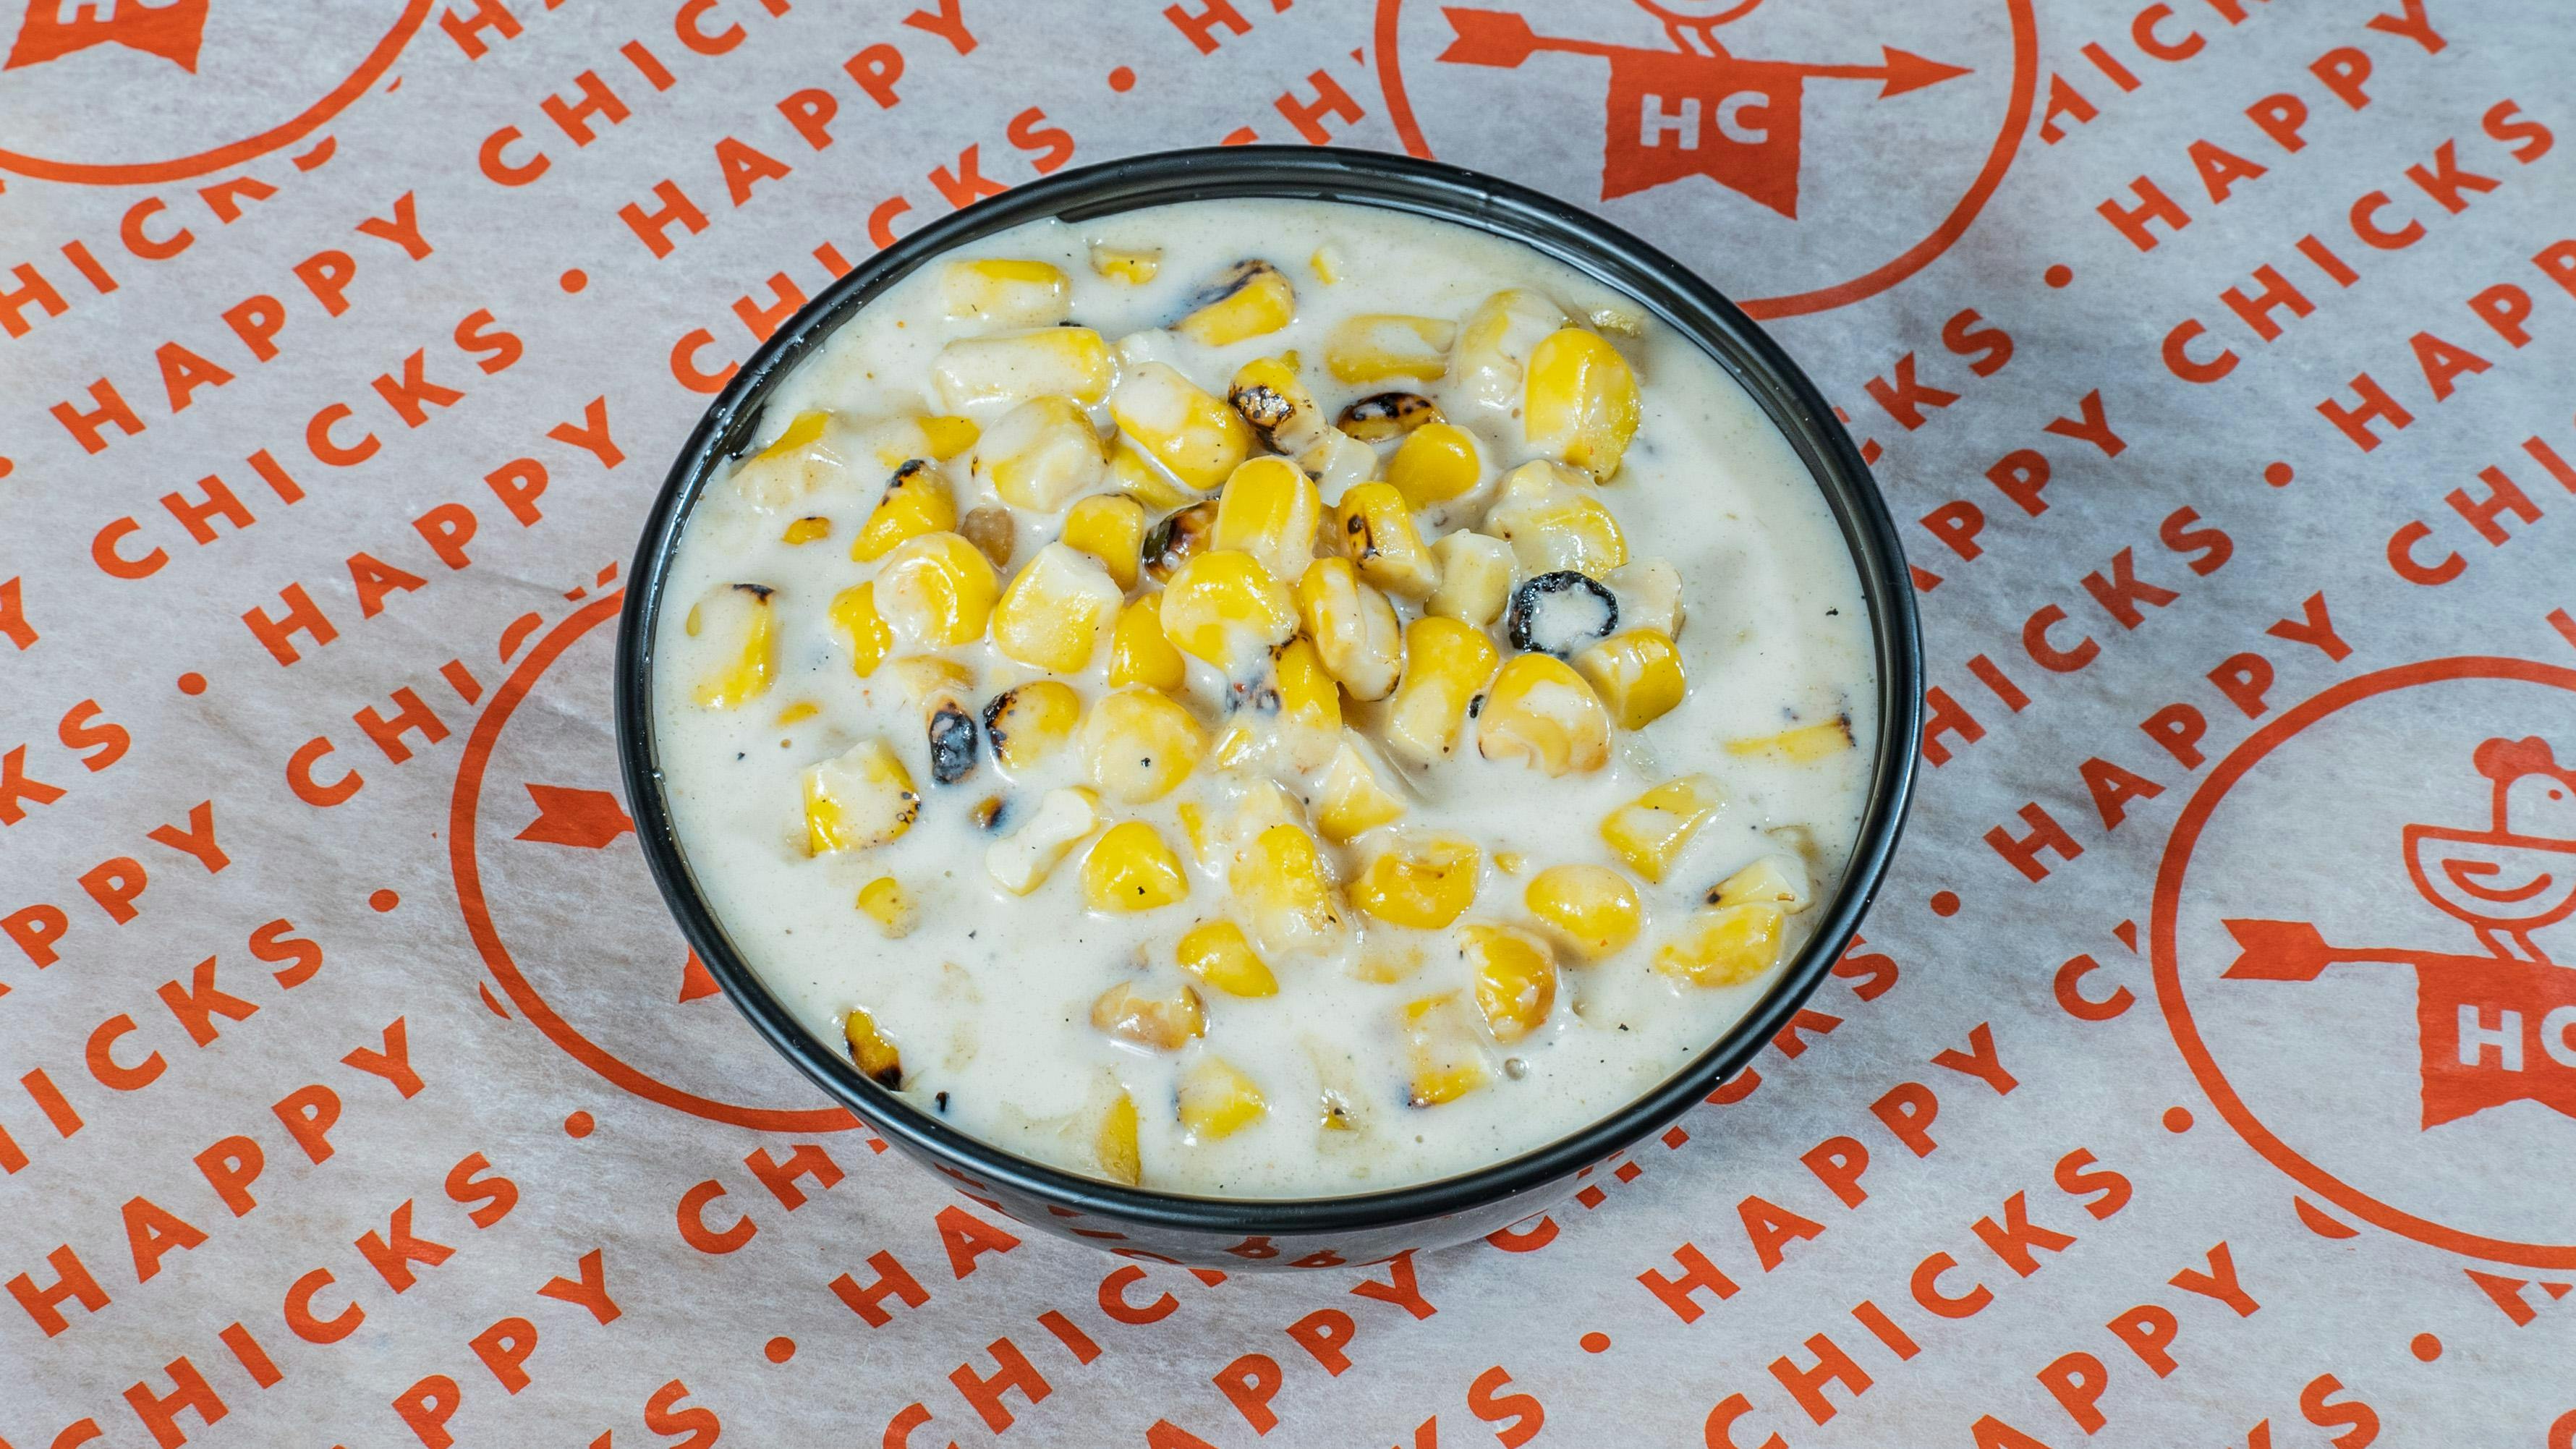 Fire Roasted Cream Corn from Happy Chicks - Burnet Rd in Austin, TX